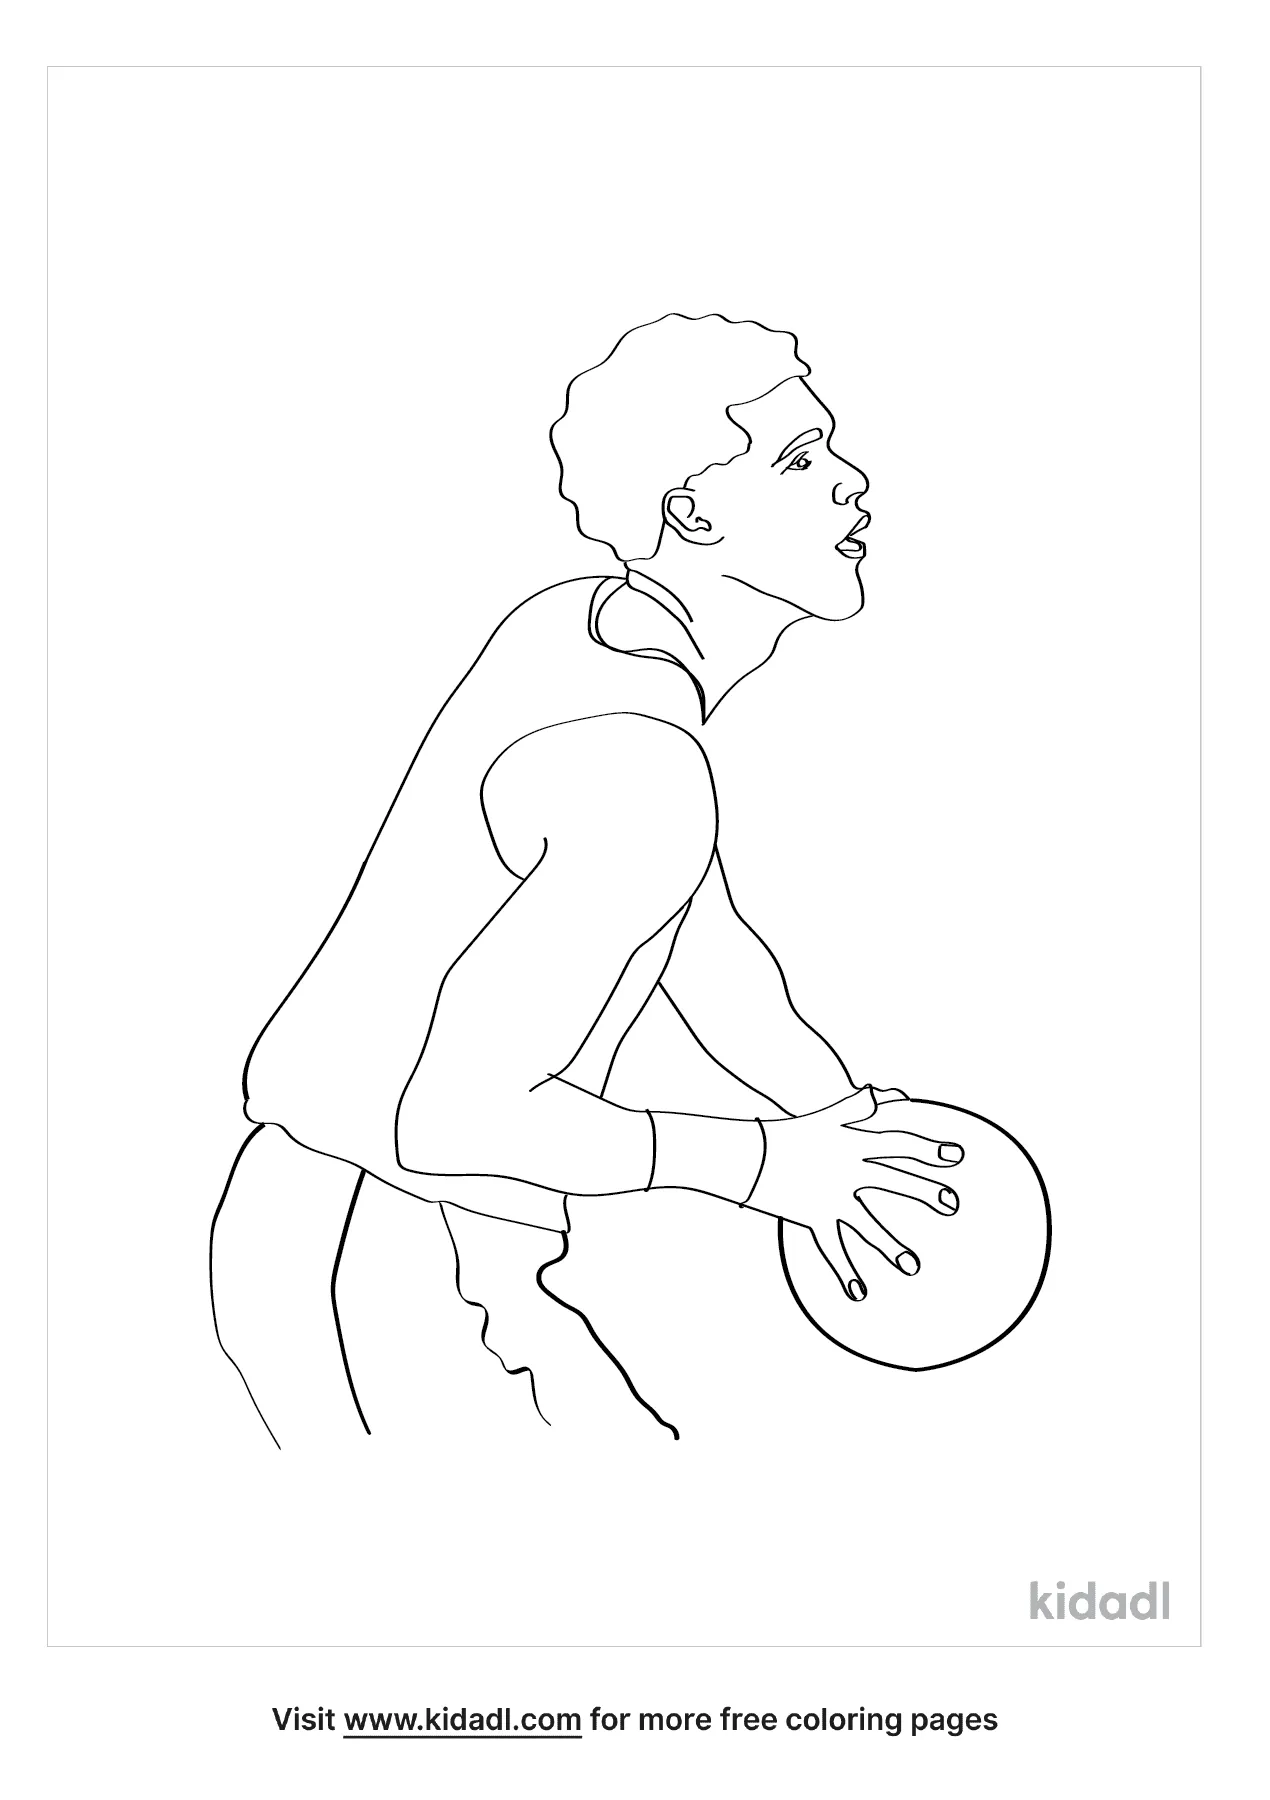 Lonzo Ball Coloring Page